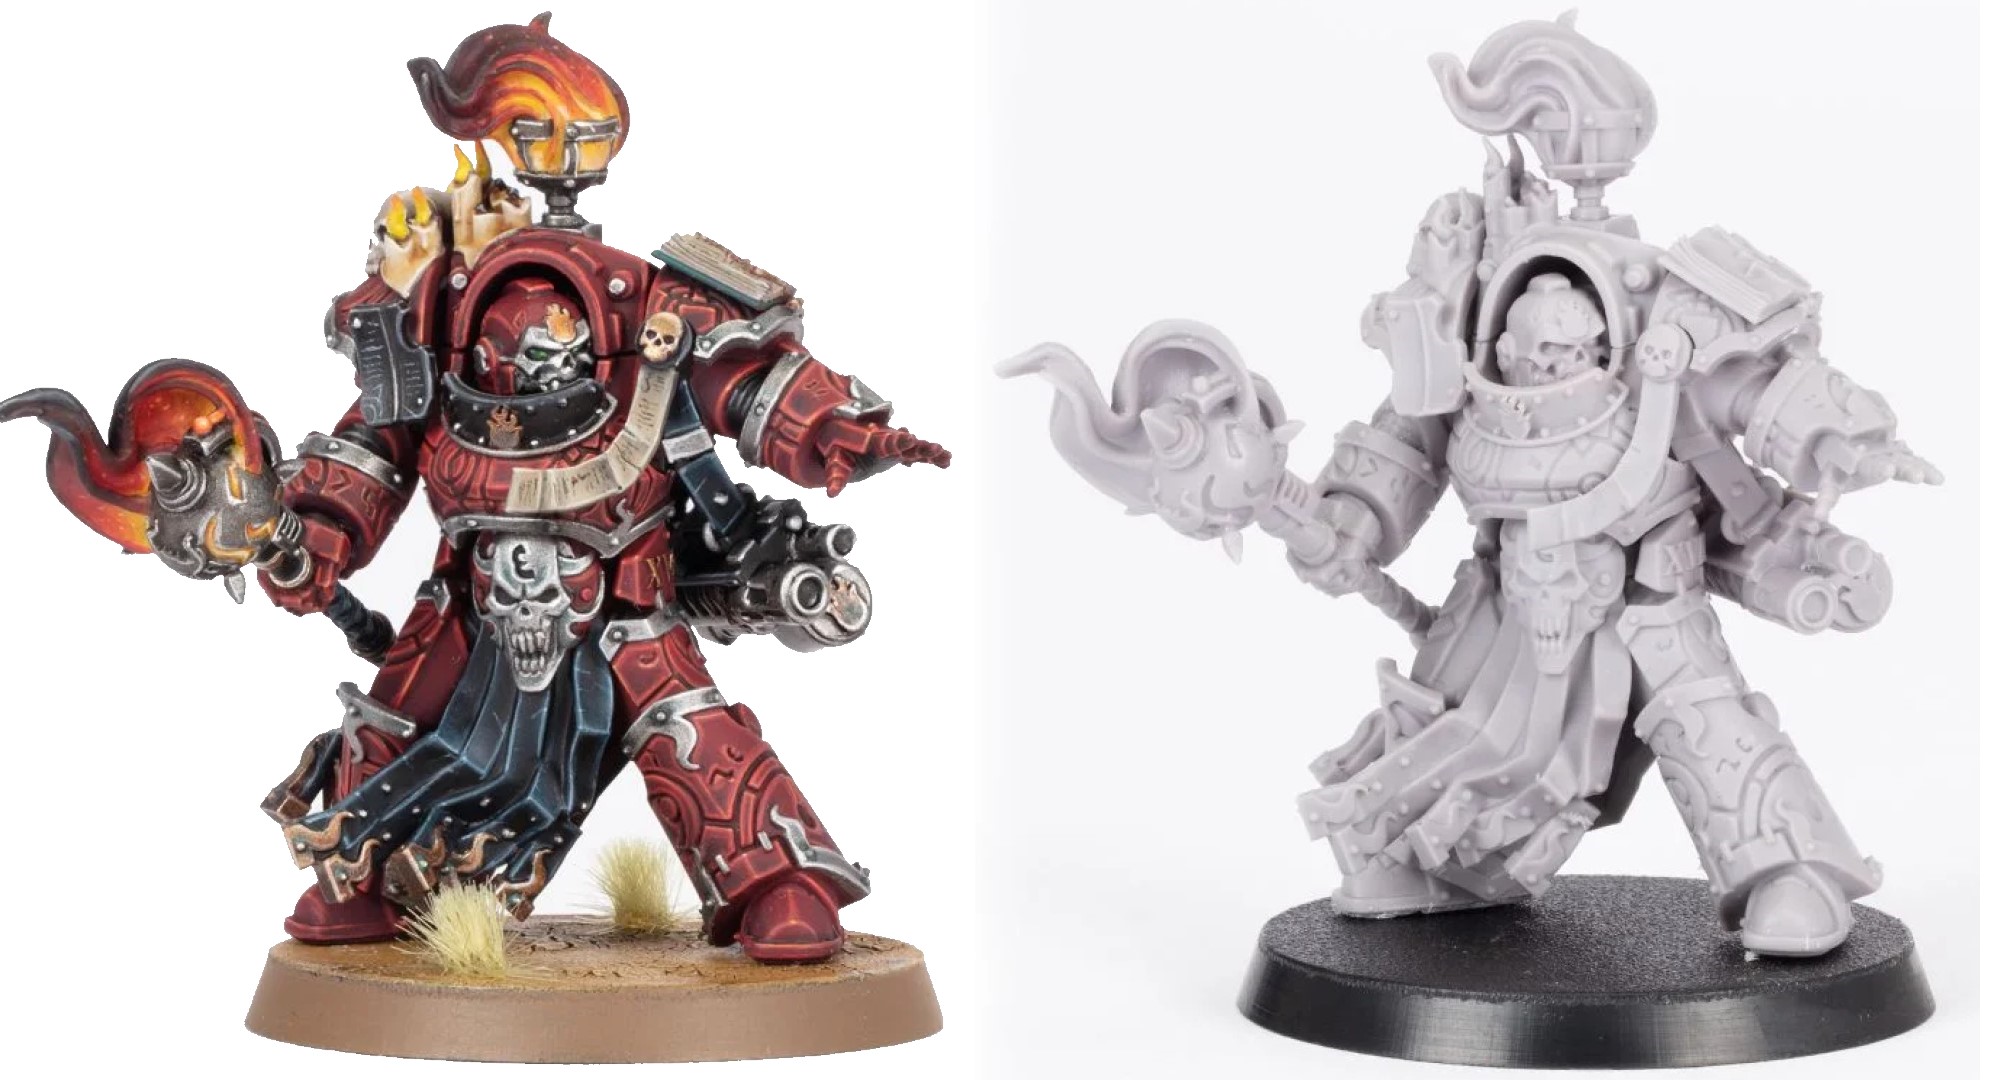 Forge World unveils new Horus Heresy chaos space marines